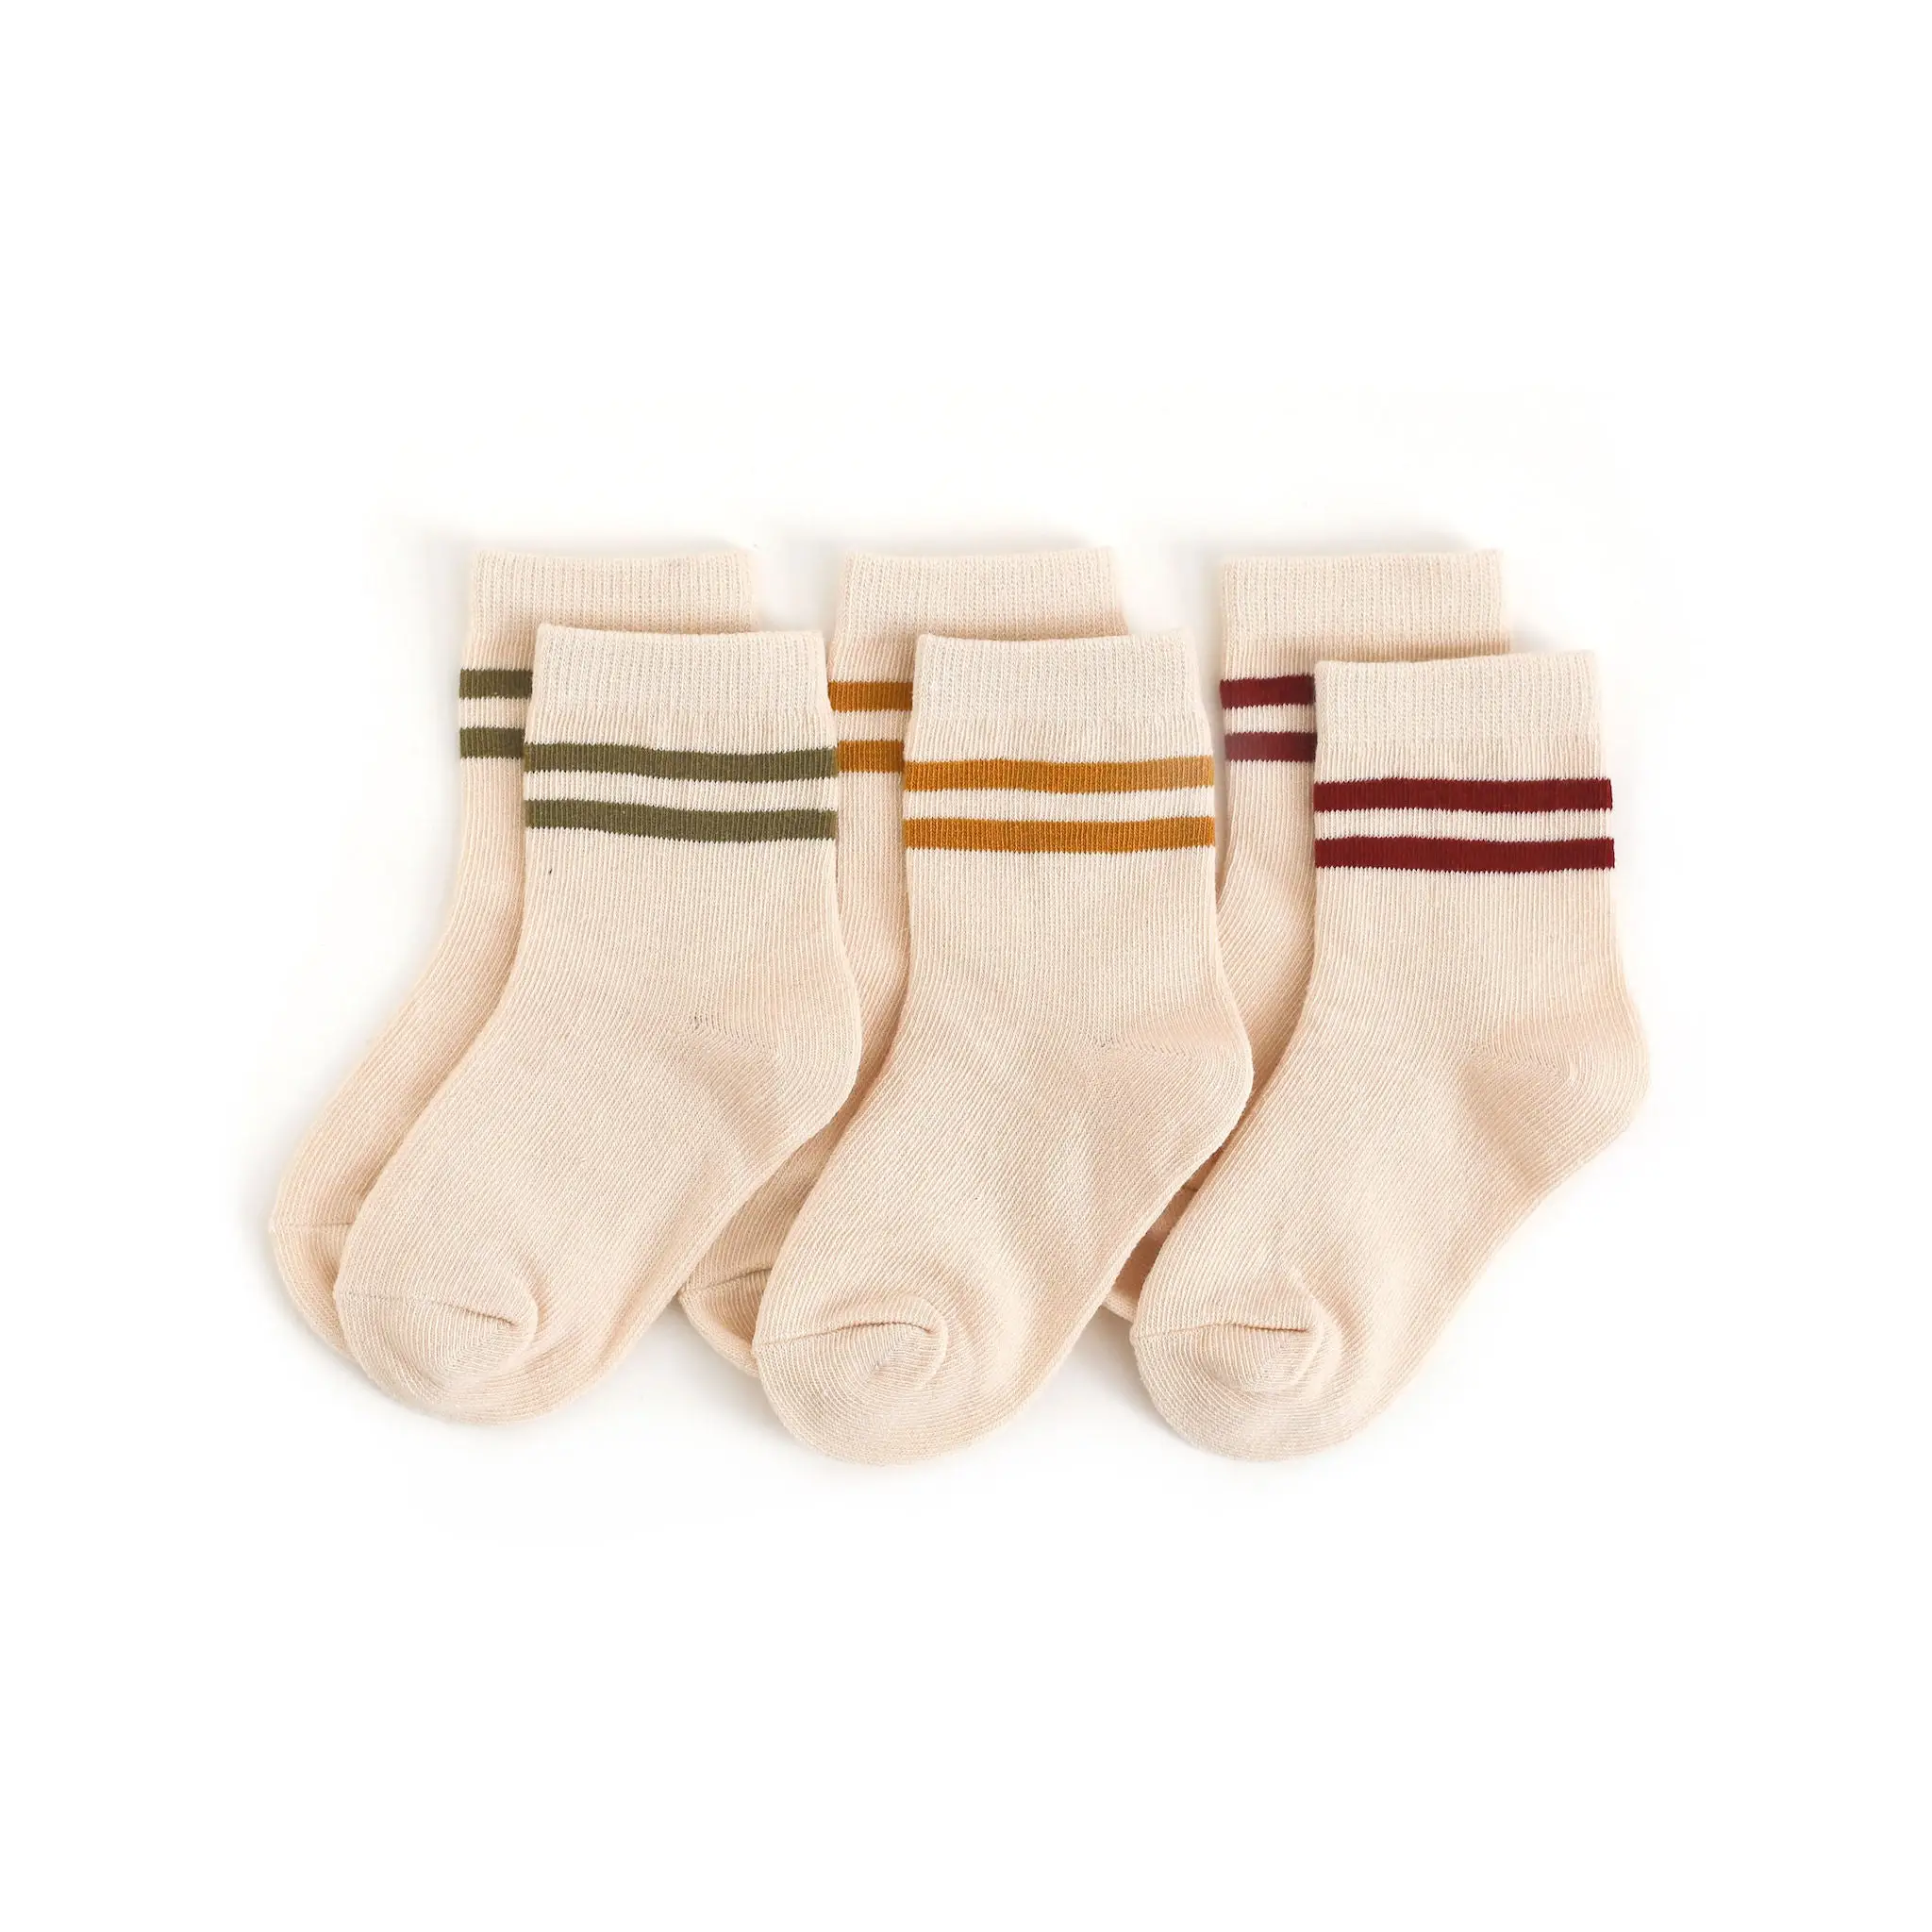 Vanilla with Stripes 3 Pack - Little Stocking Co.